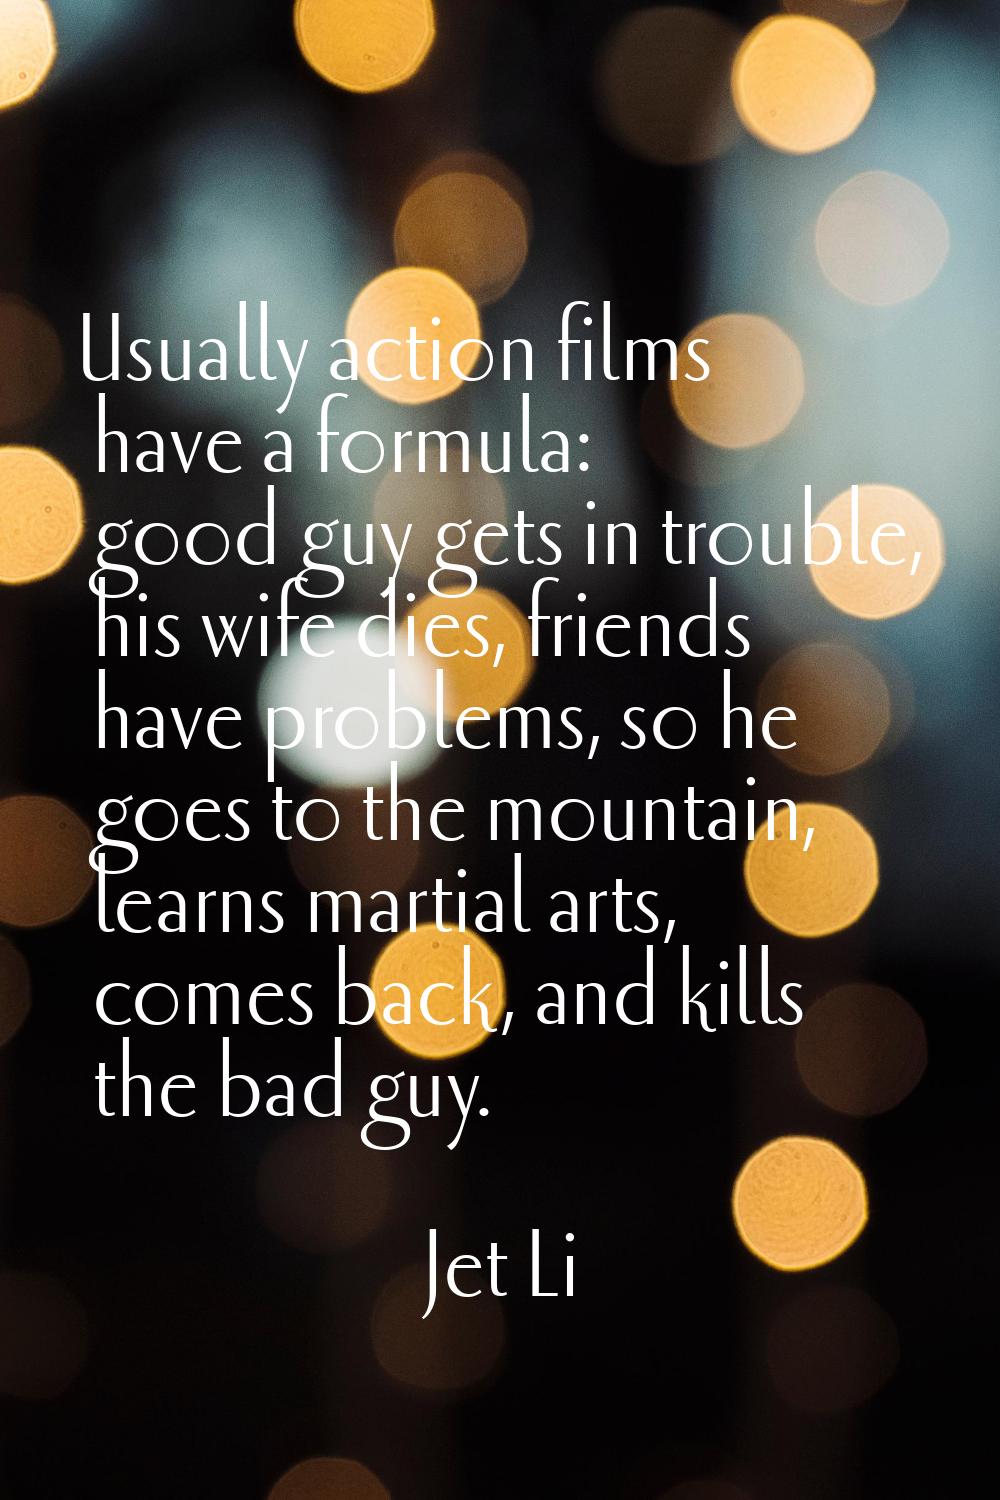 Usually action films have a formula: good guy gets in trouble, his wife dies, friends have problems